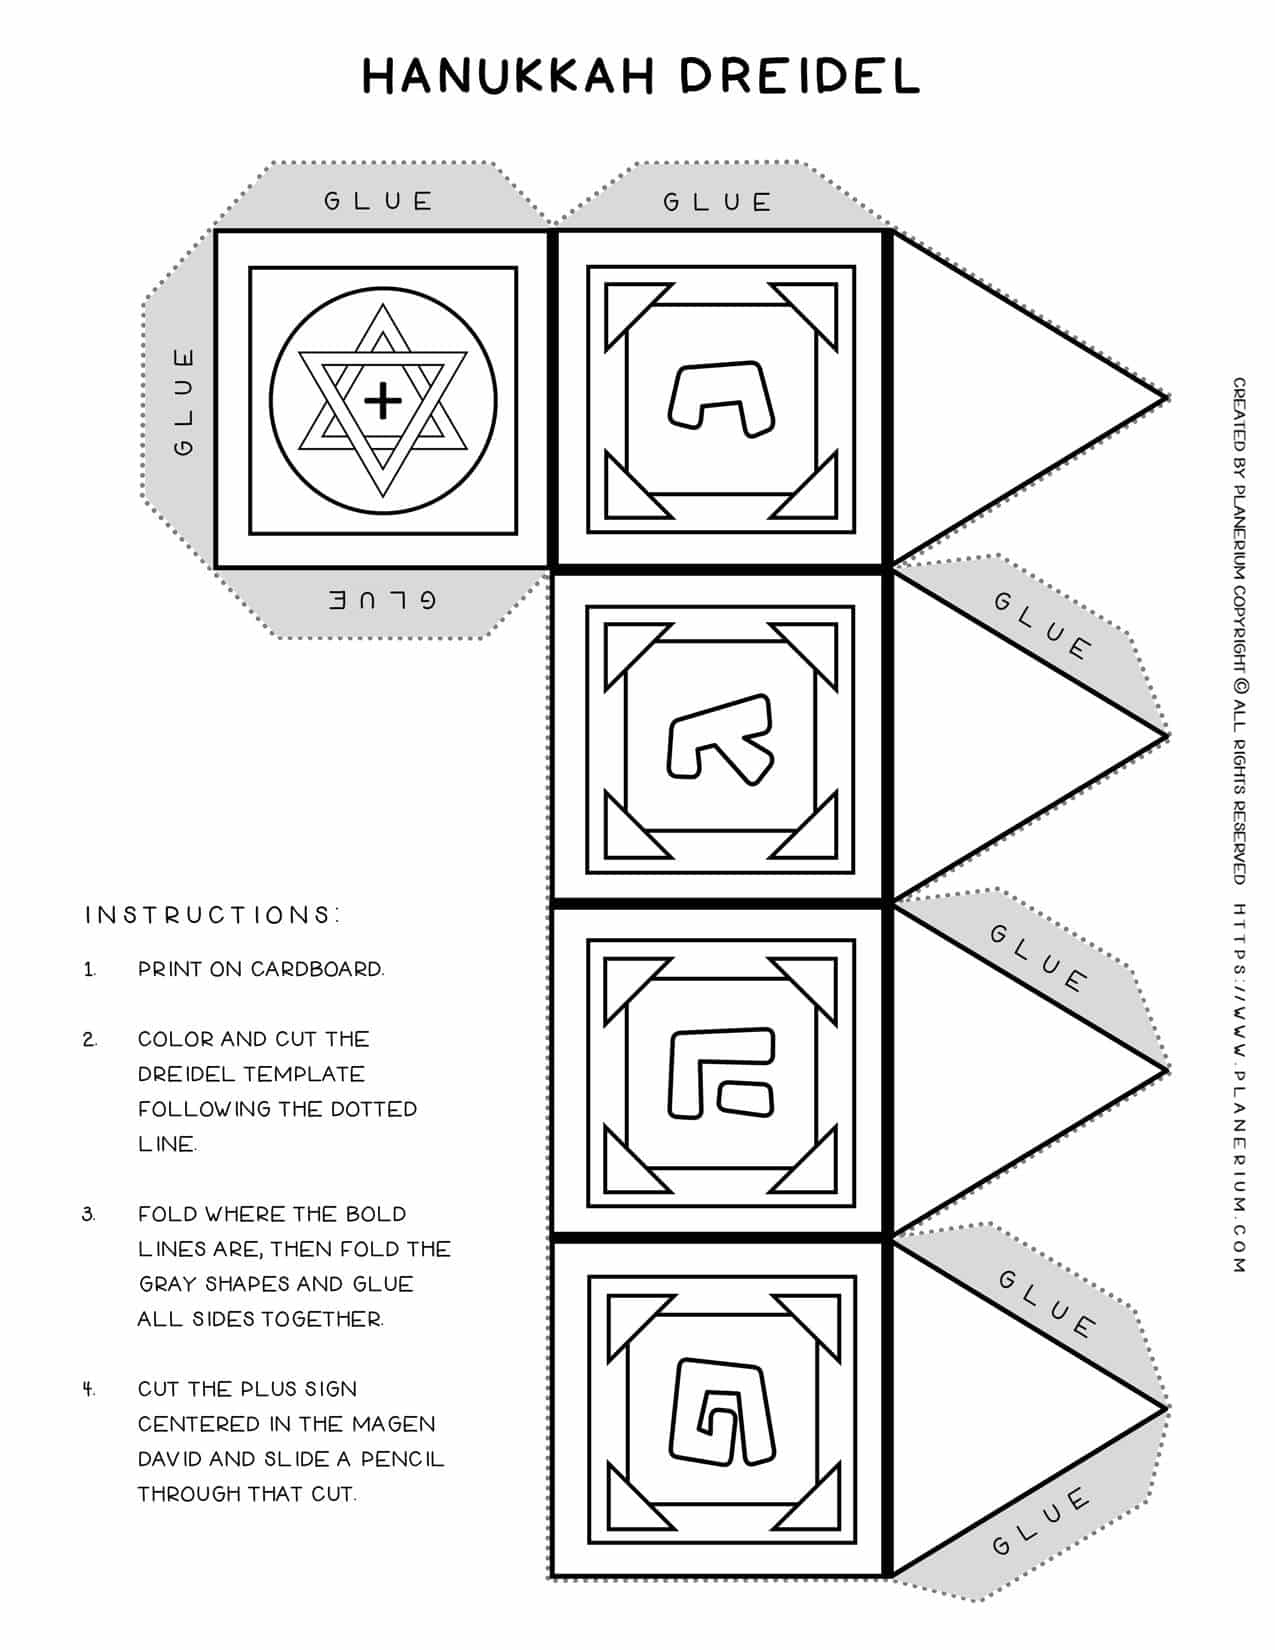 Dreidel Template With The Hebrew Letter Pey Free Printable Planerium